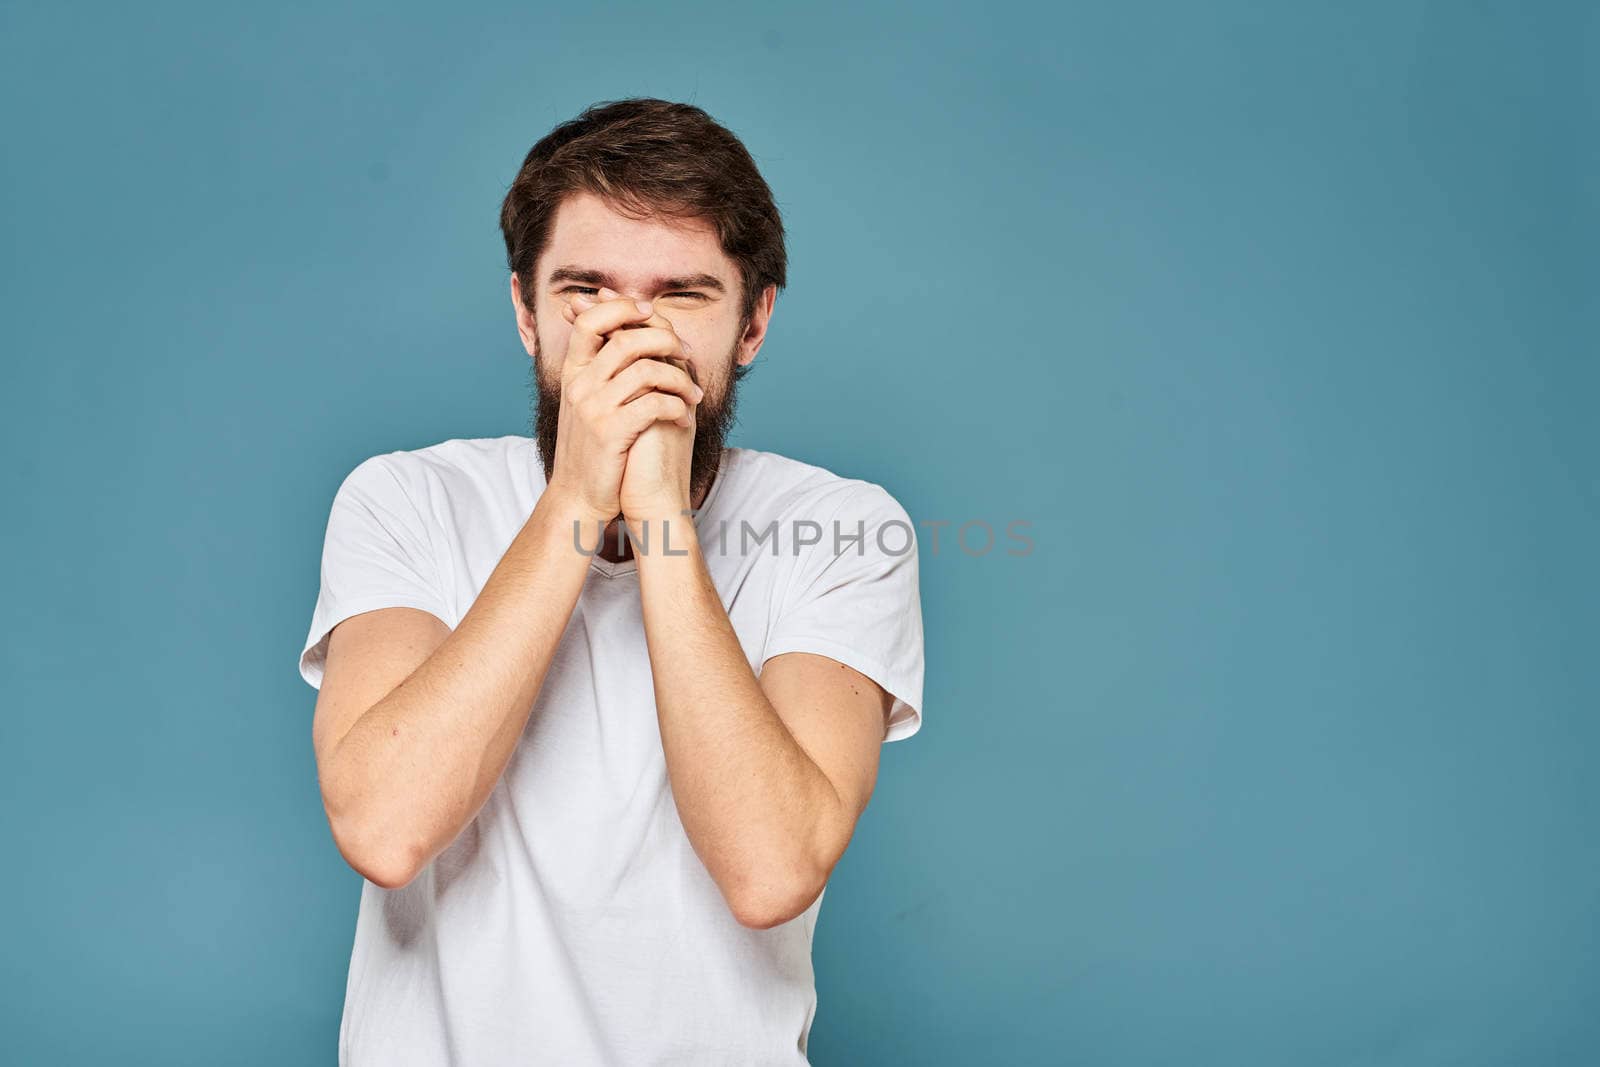 A bearded man in a white T-shirt gestures with his hands emotions blue background by SHOTPRIME